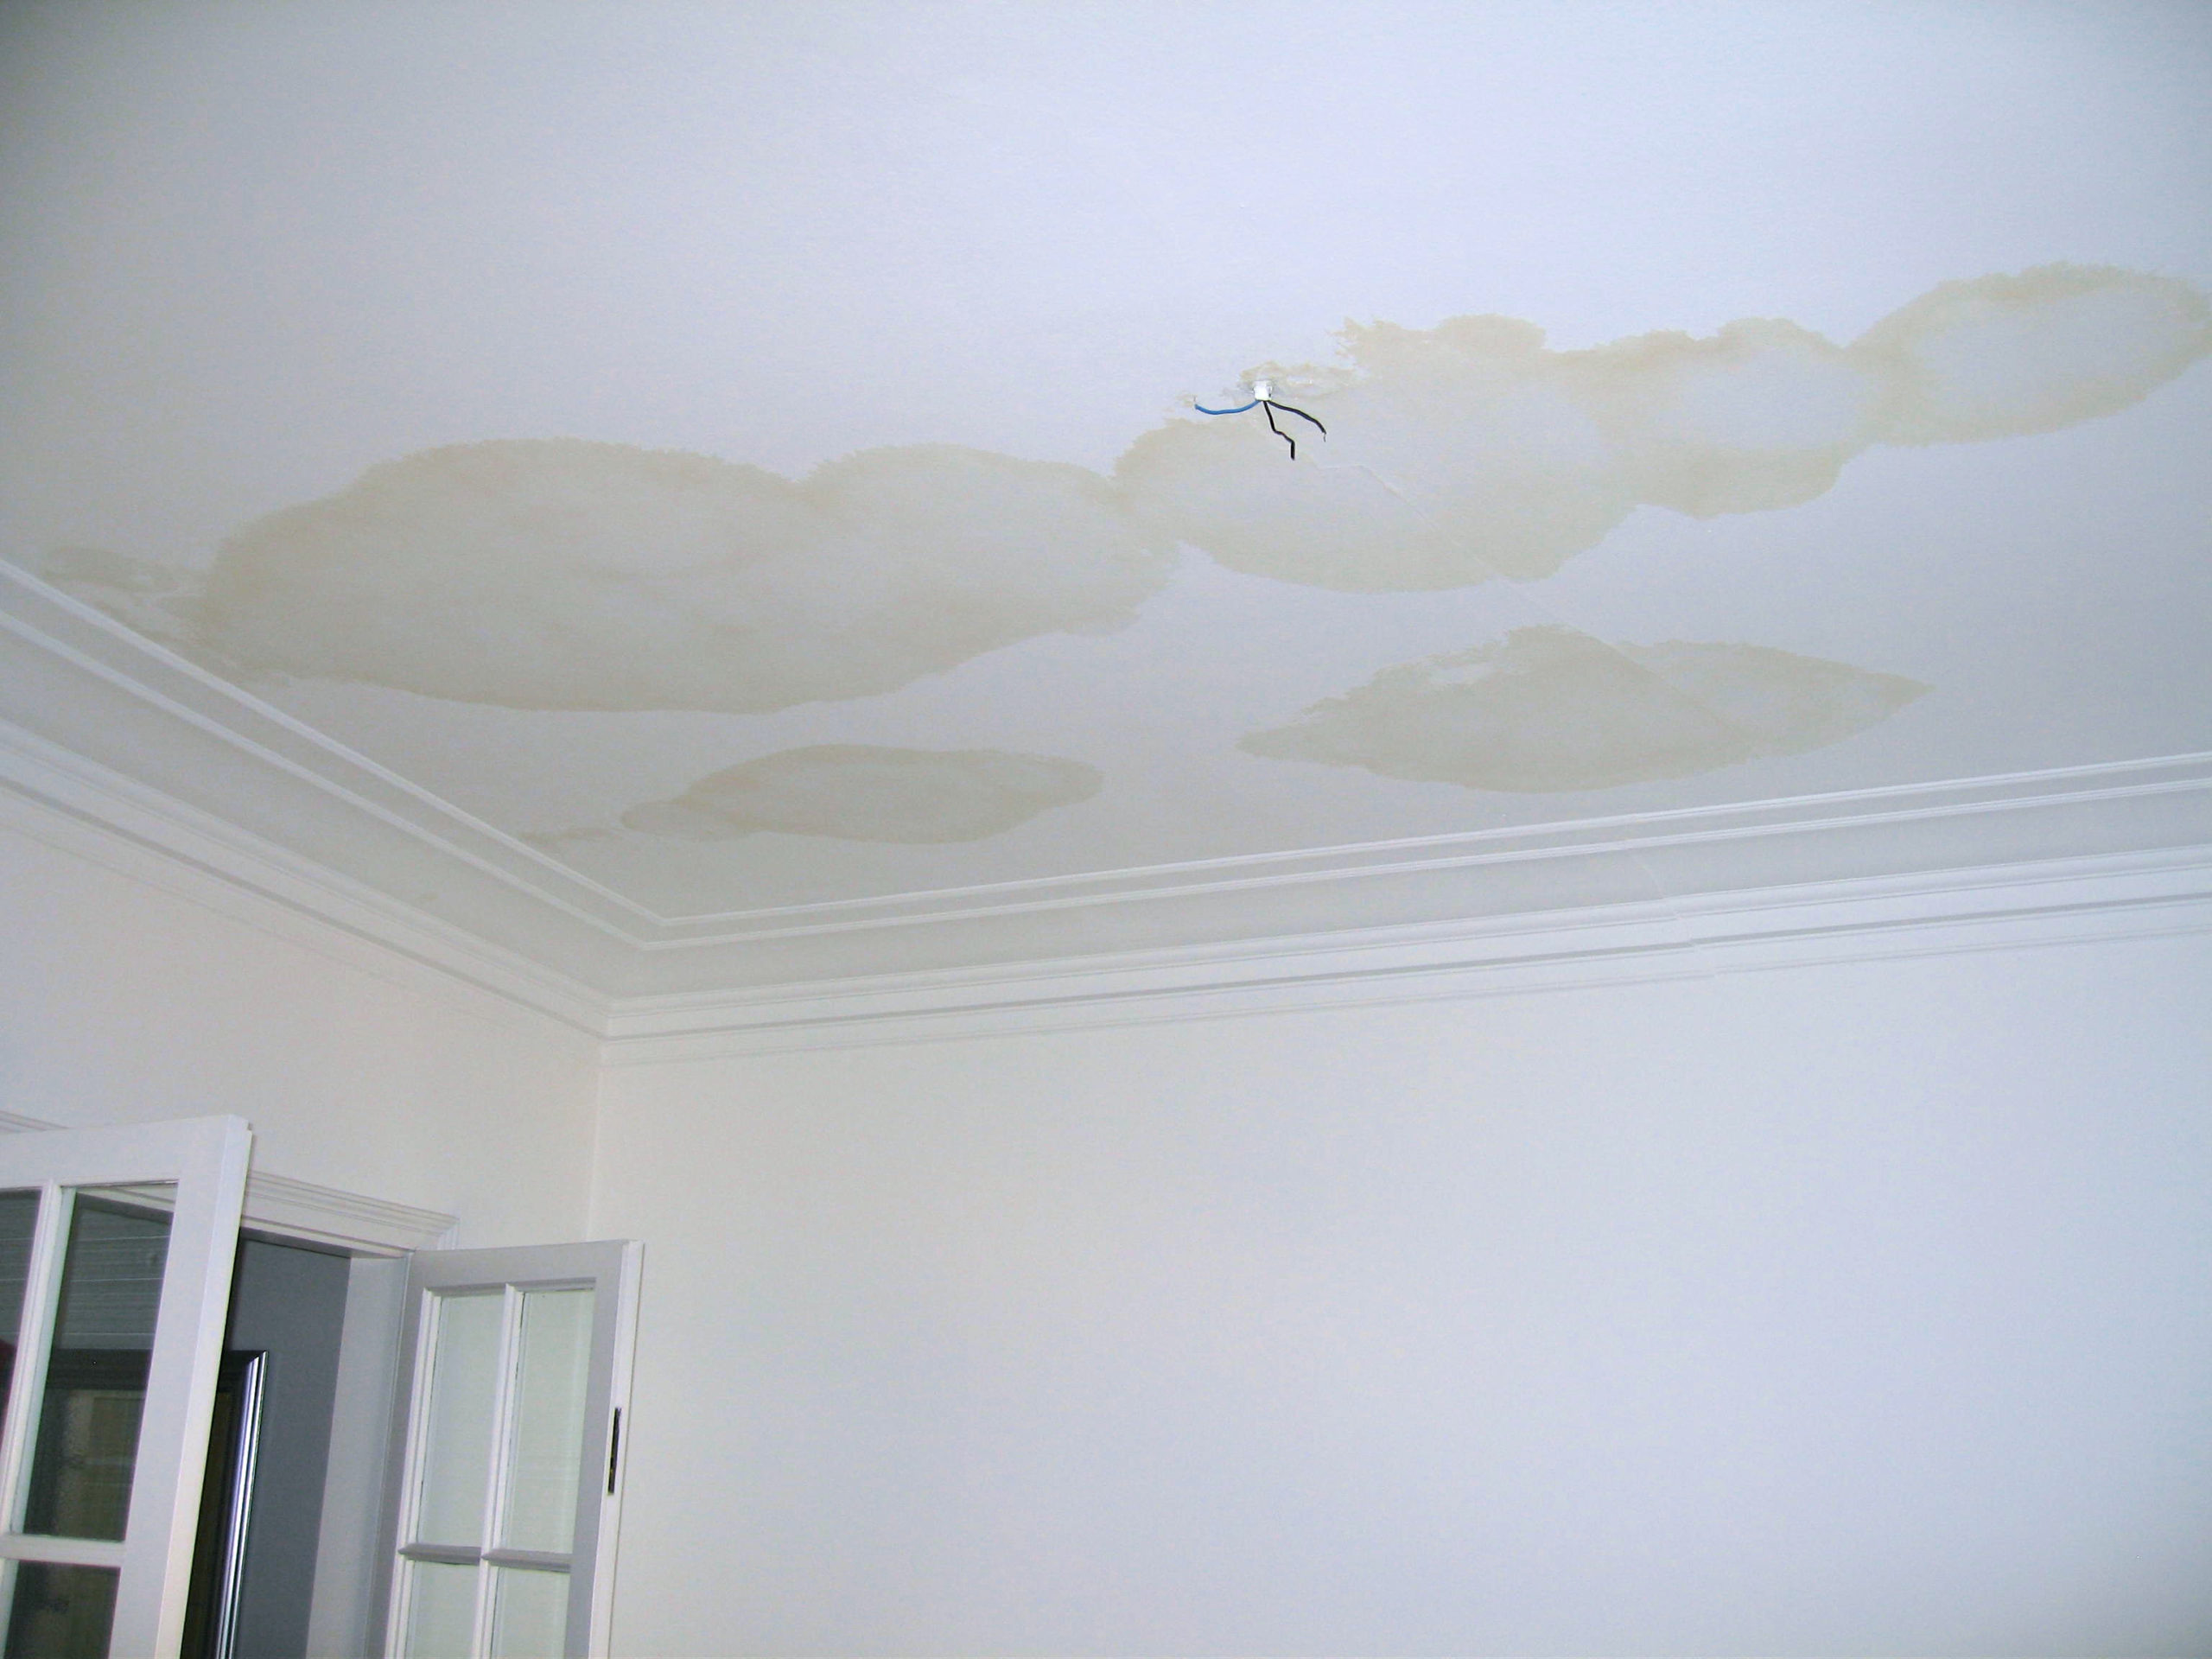 Home Improvement Made Easy Covering Ceiling Stains Denver Urban